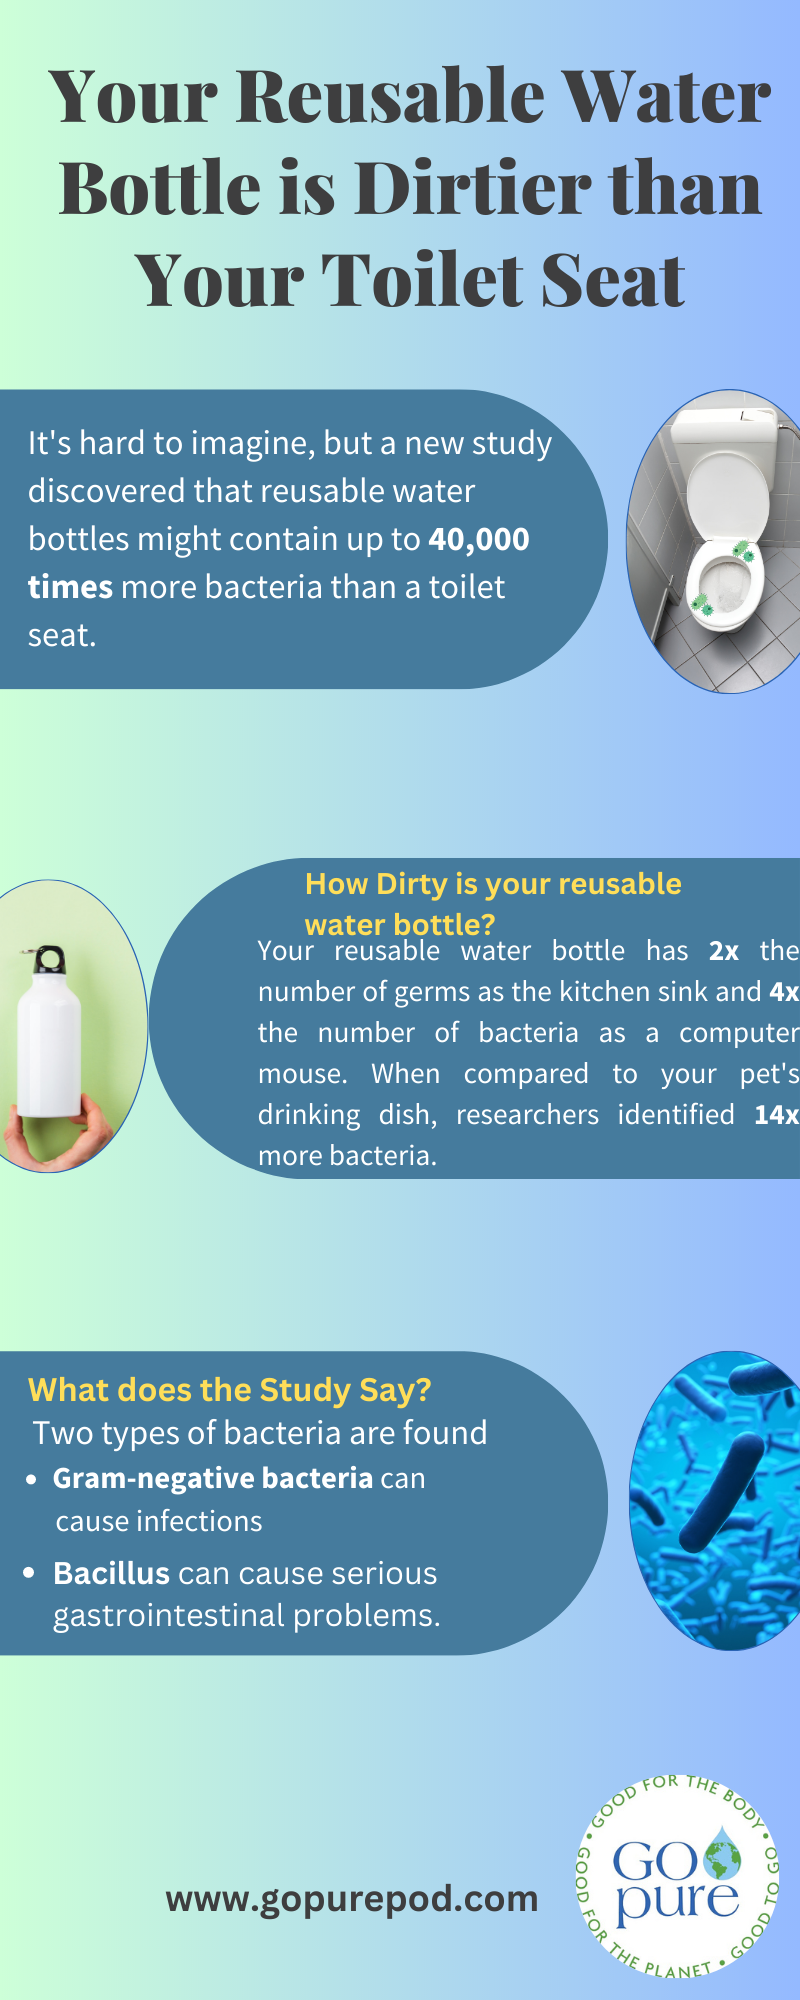 Your Reusable Water Bottle is Dirtier than Your Toilet Seat